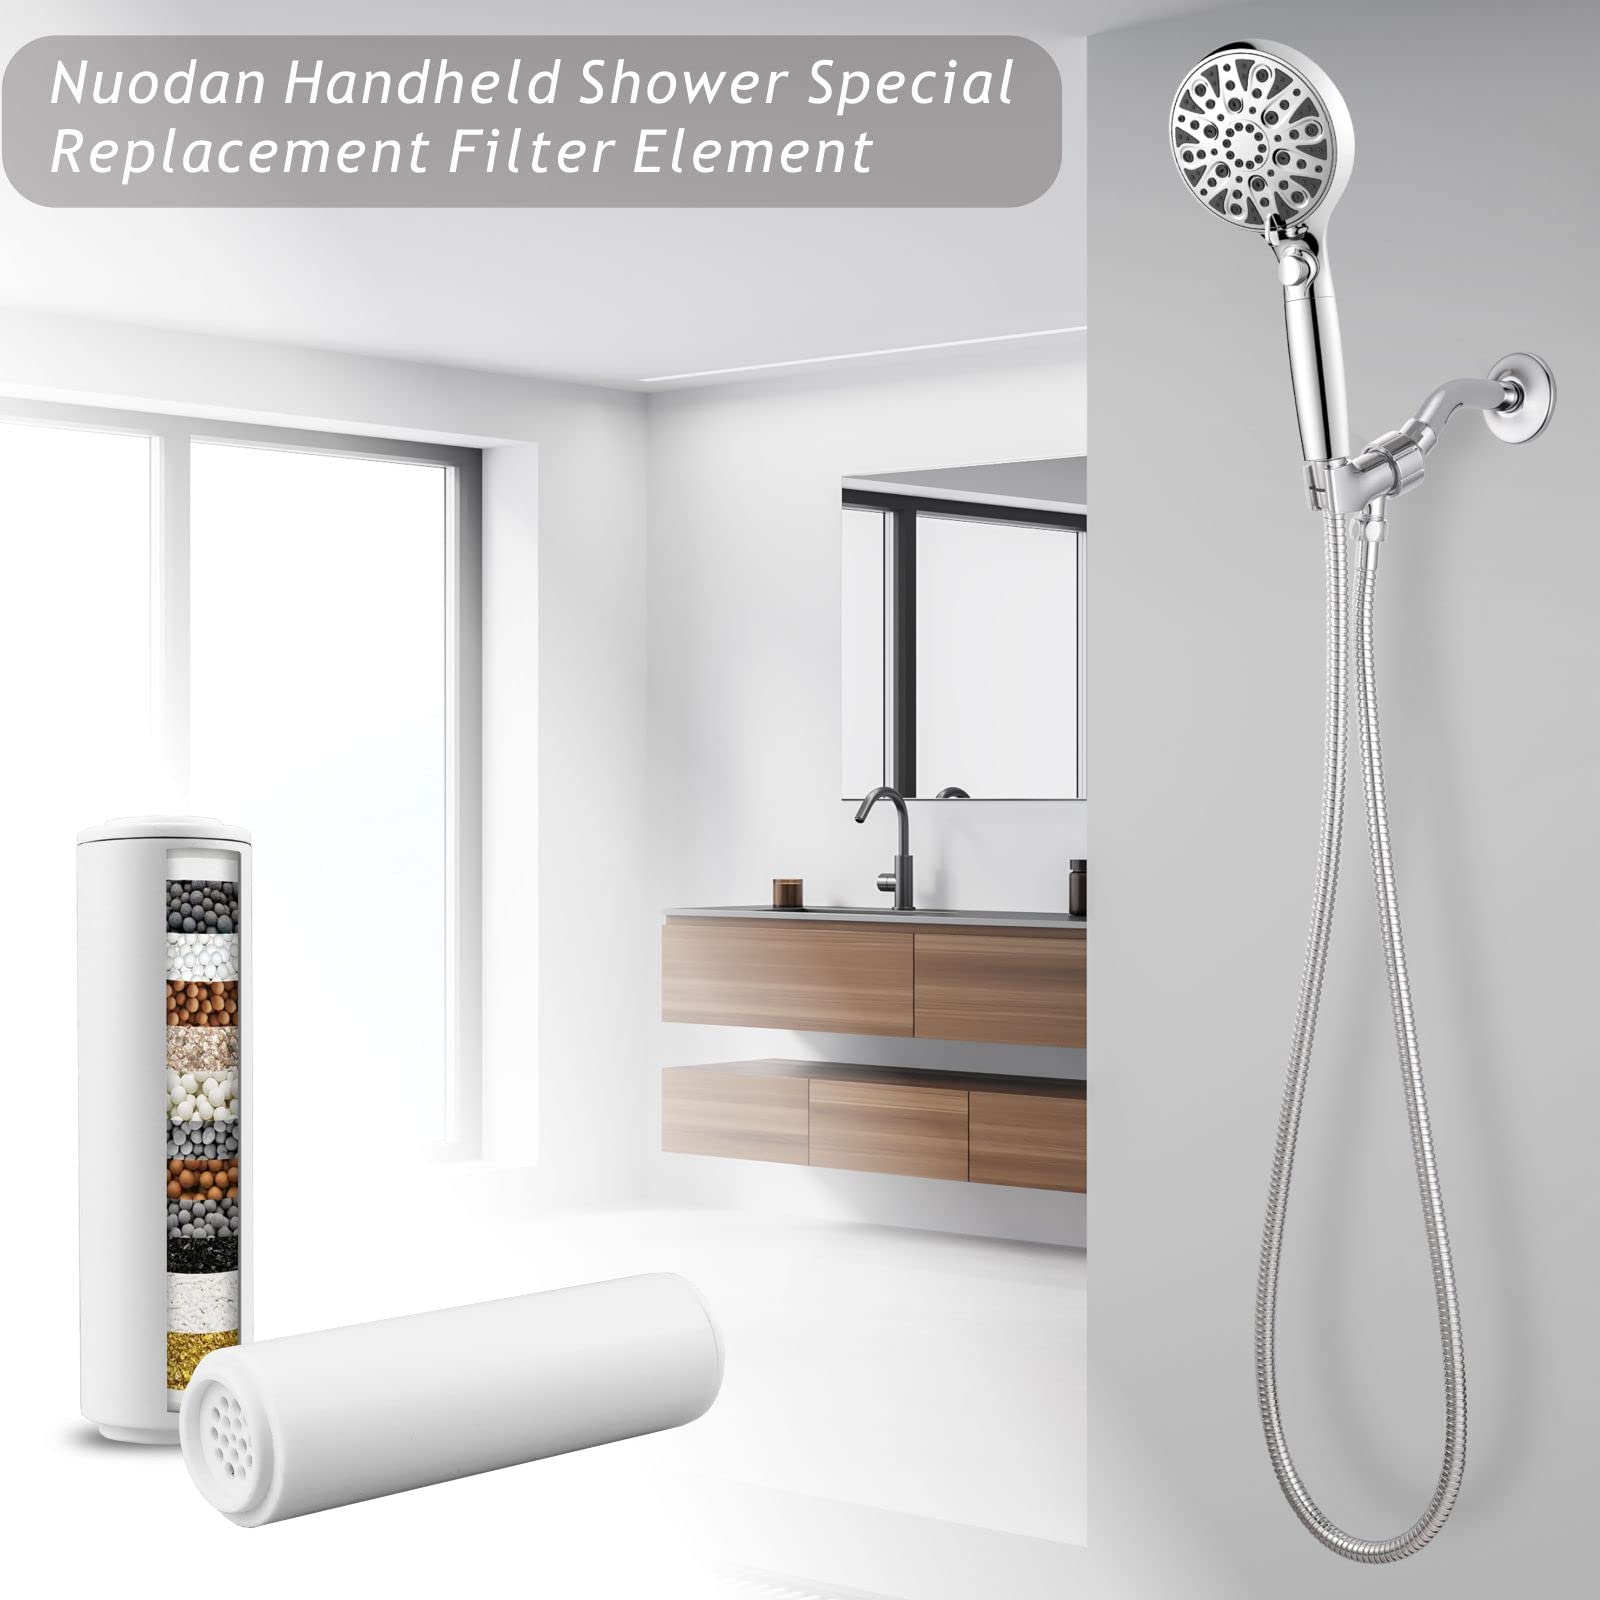 Nuodan Handheld Shower Head - High Pressure 6-mode Hand Held Shower Head with Brackets, Anti-clog Nozzles, Built-in Power Wash to Clean Tub, Tile & Pets, Extra Long 6 ft. Stainless Steel Hose